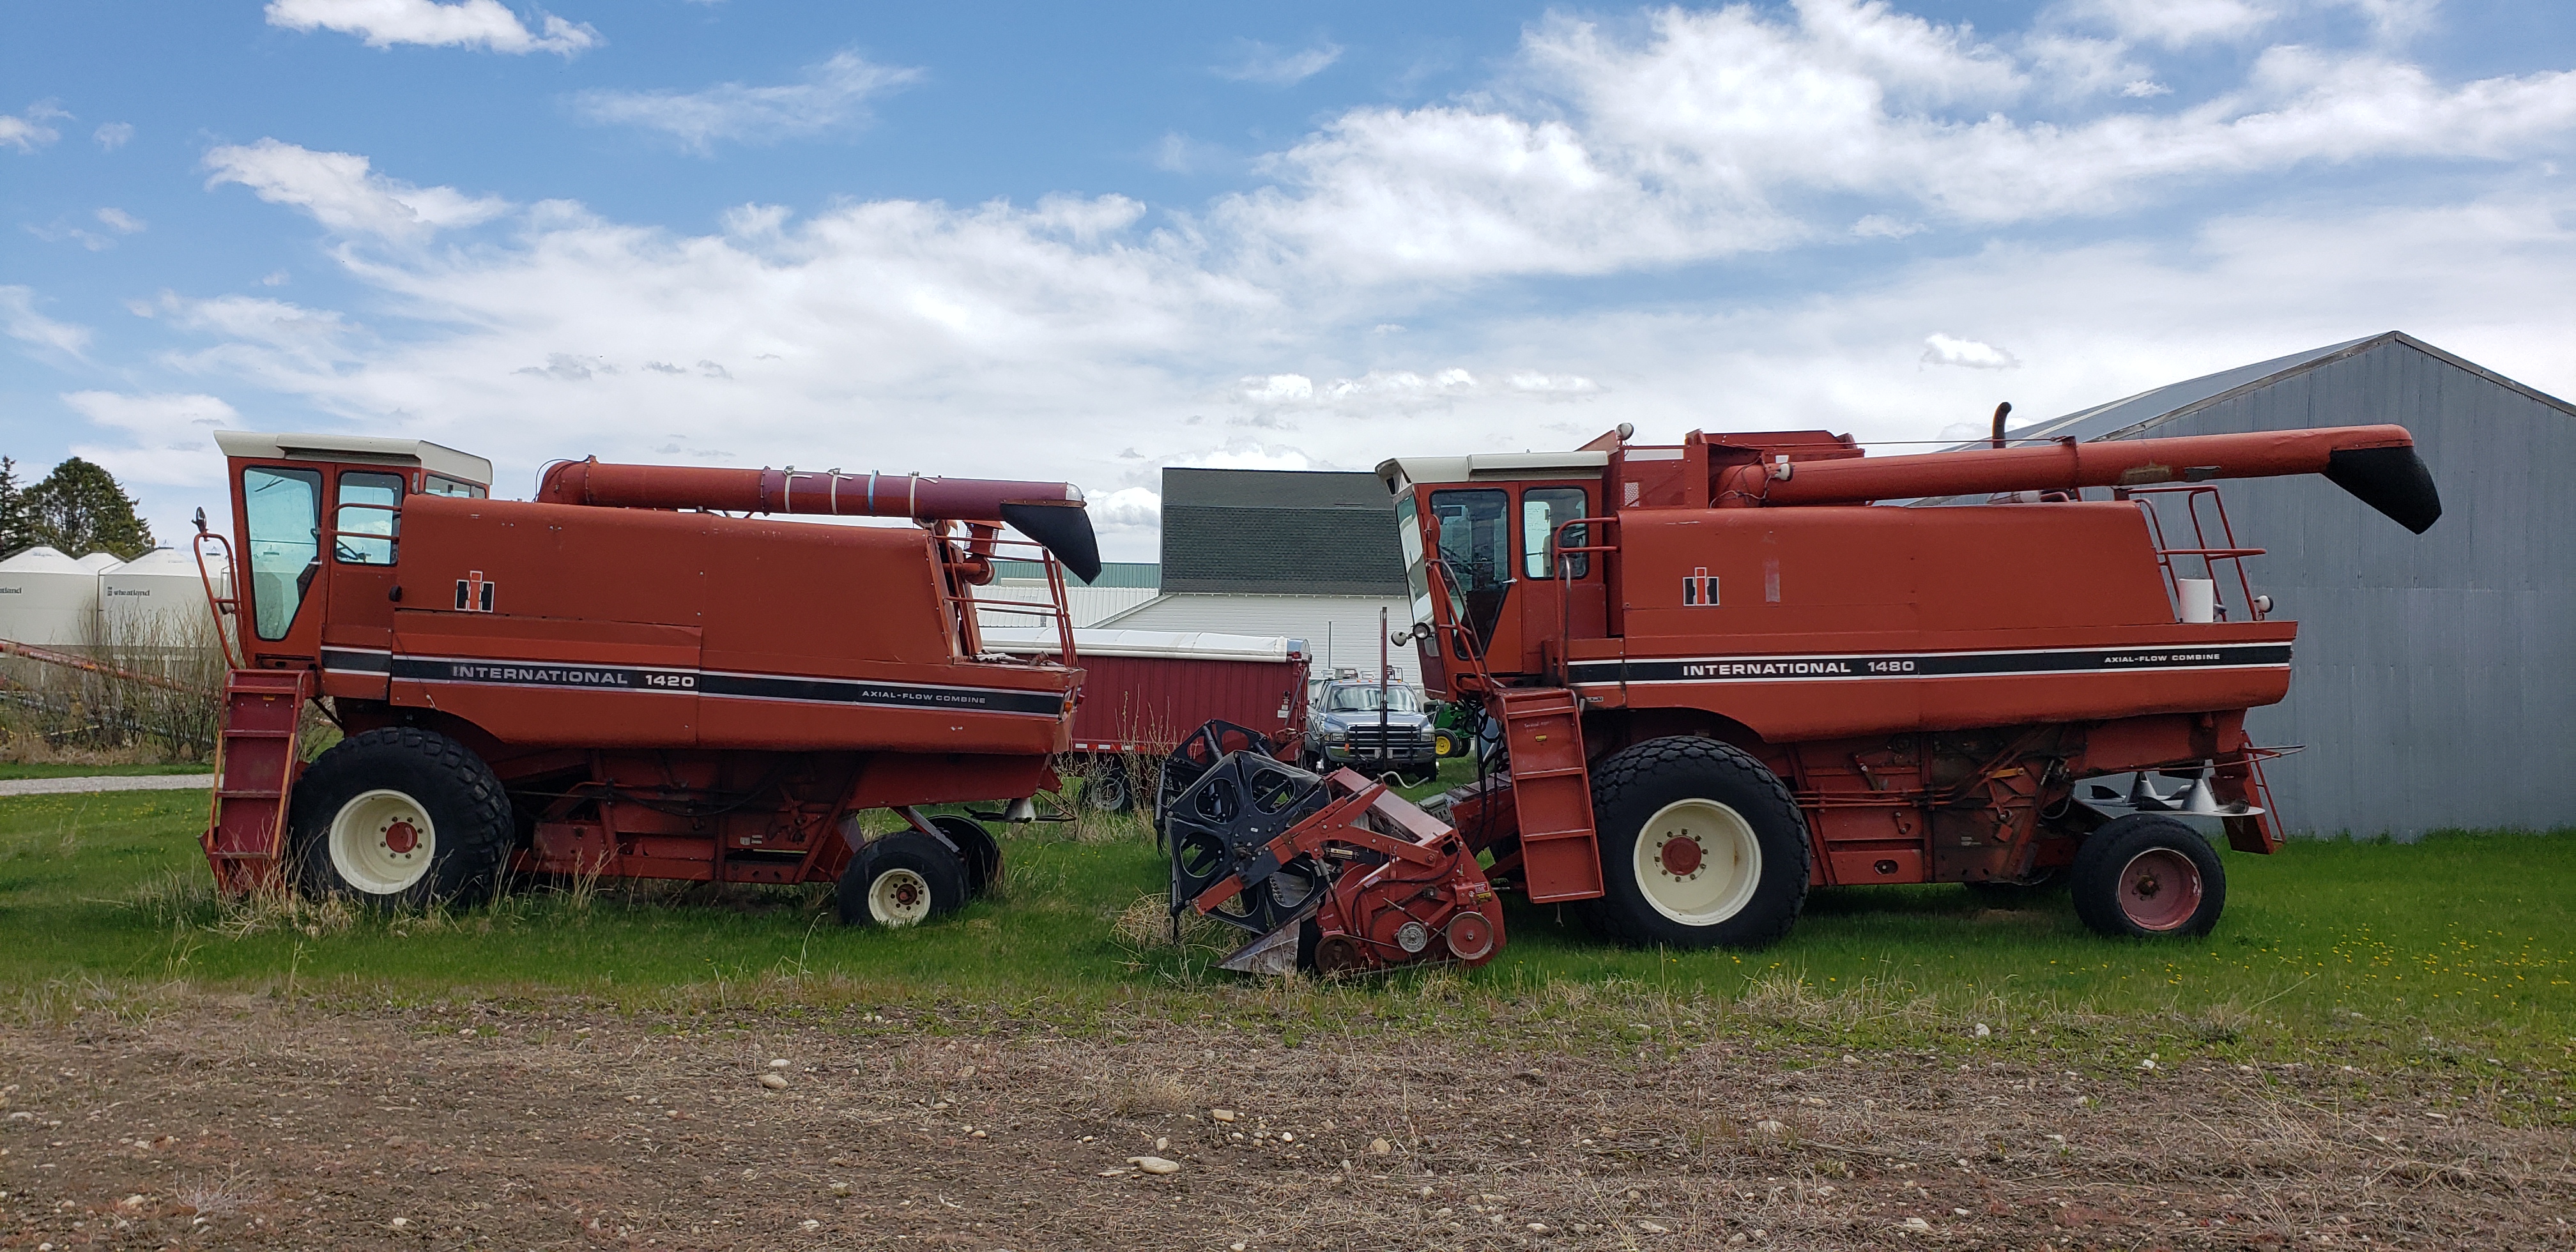 Two Red combine farm vehicles